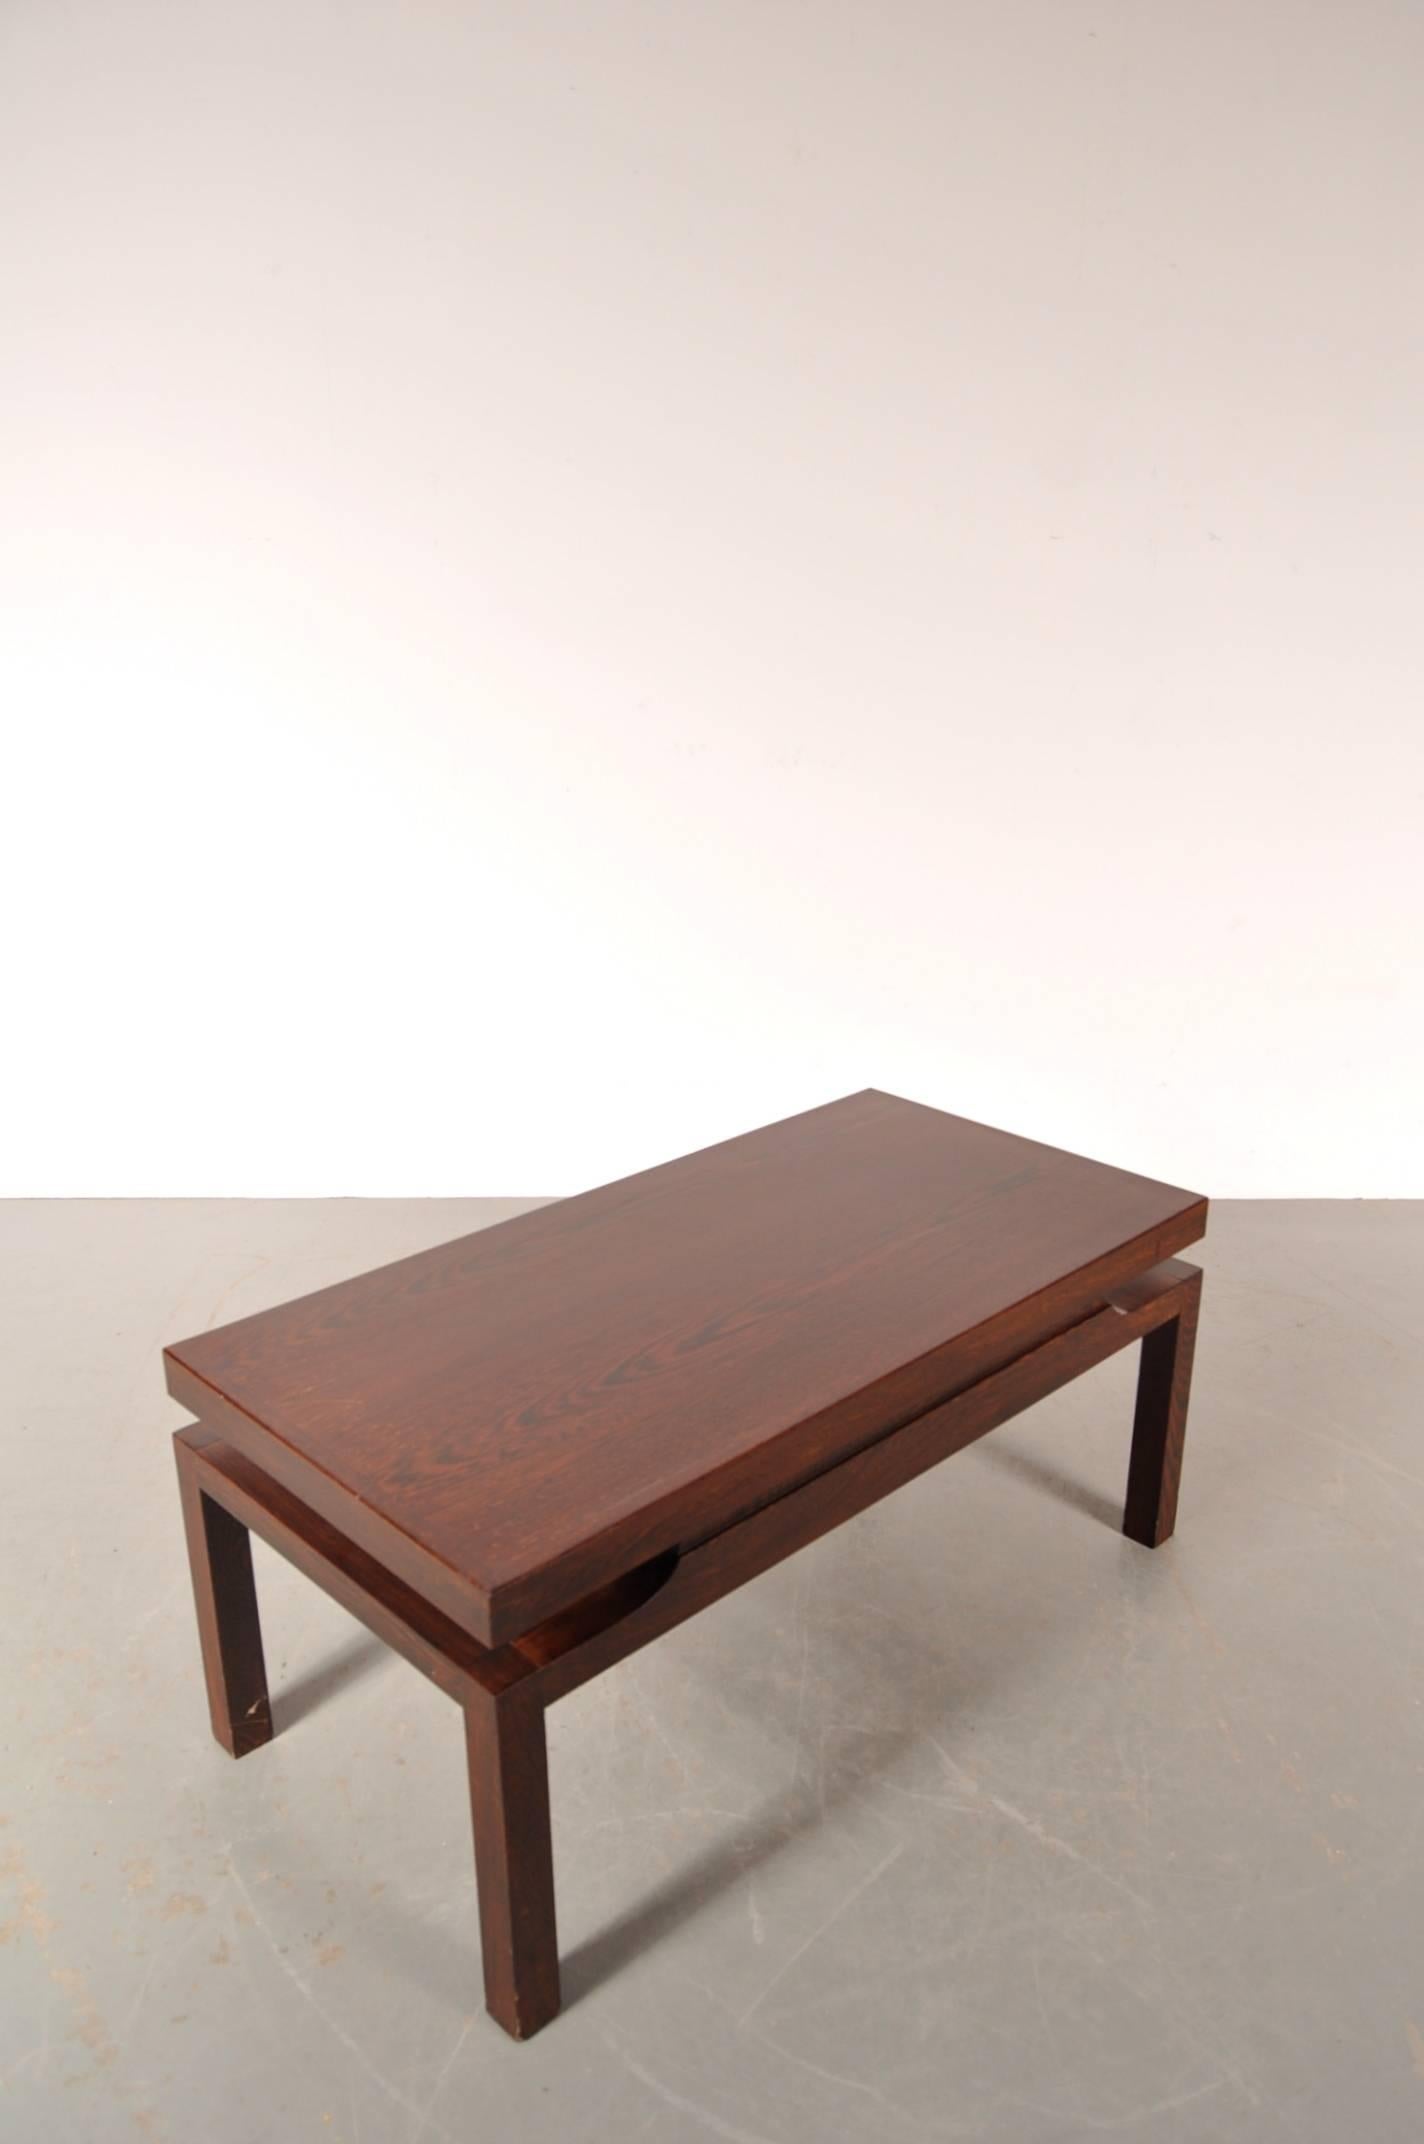 Stunning coffee table designed by Emiel Veranneman in Belgium around 1960.

This beautifully designed piece is completely made of the highest quality wengé wood. It is well crafted with a very nice eye for detail, a unique and eye-catching piece